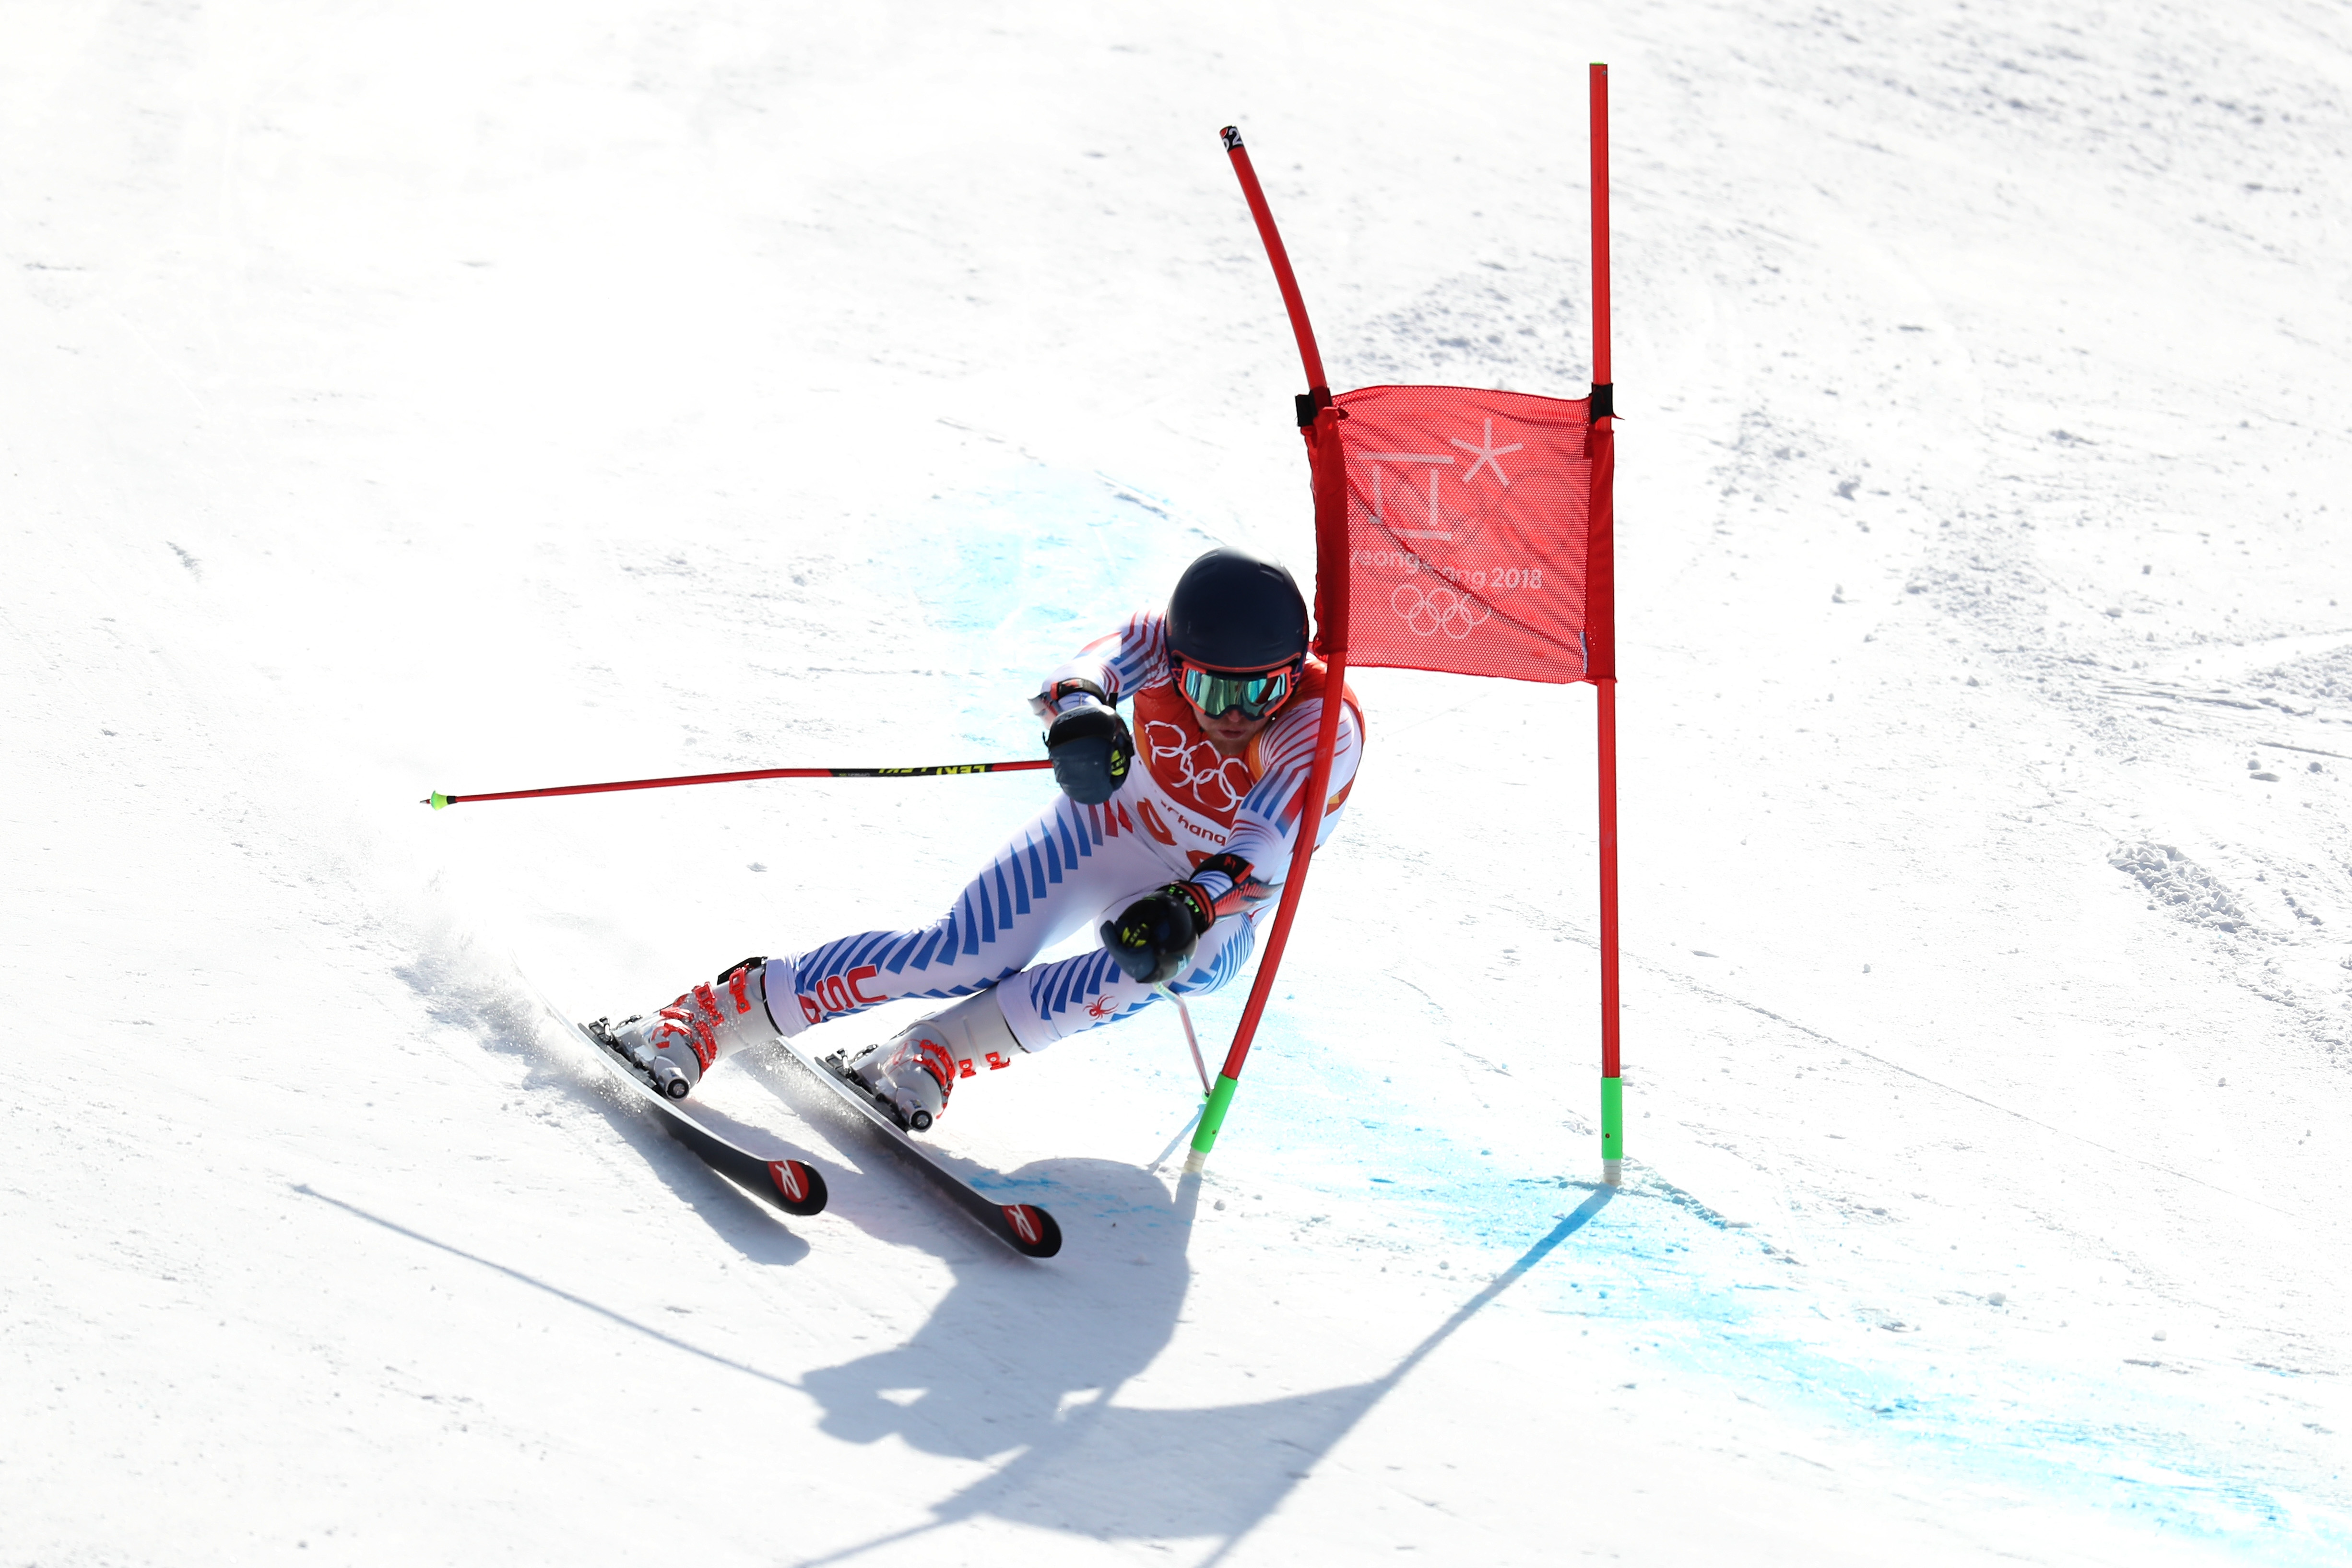 Ryan Cochran-Siegle finished 11th to lead Team USA in giant slalom Sunday at Yongpyong Alpine Centre. (Getty Images - Al Bello)